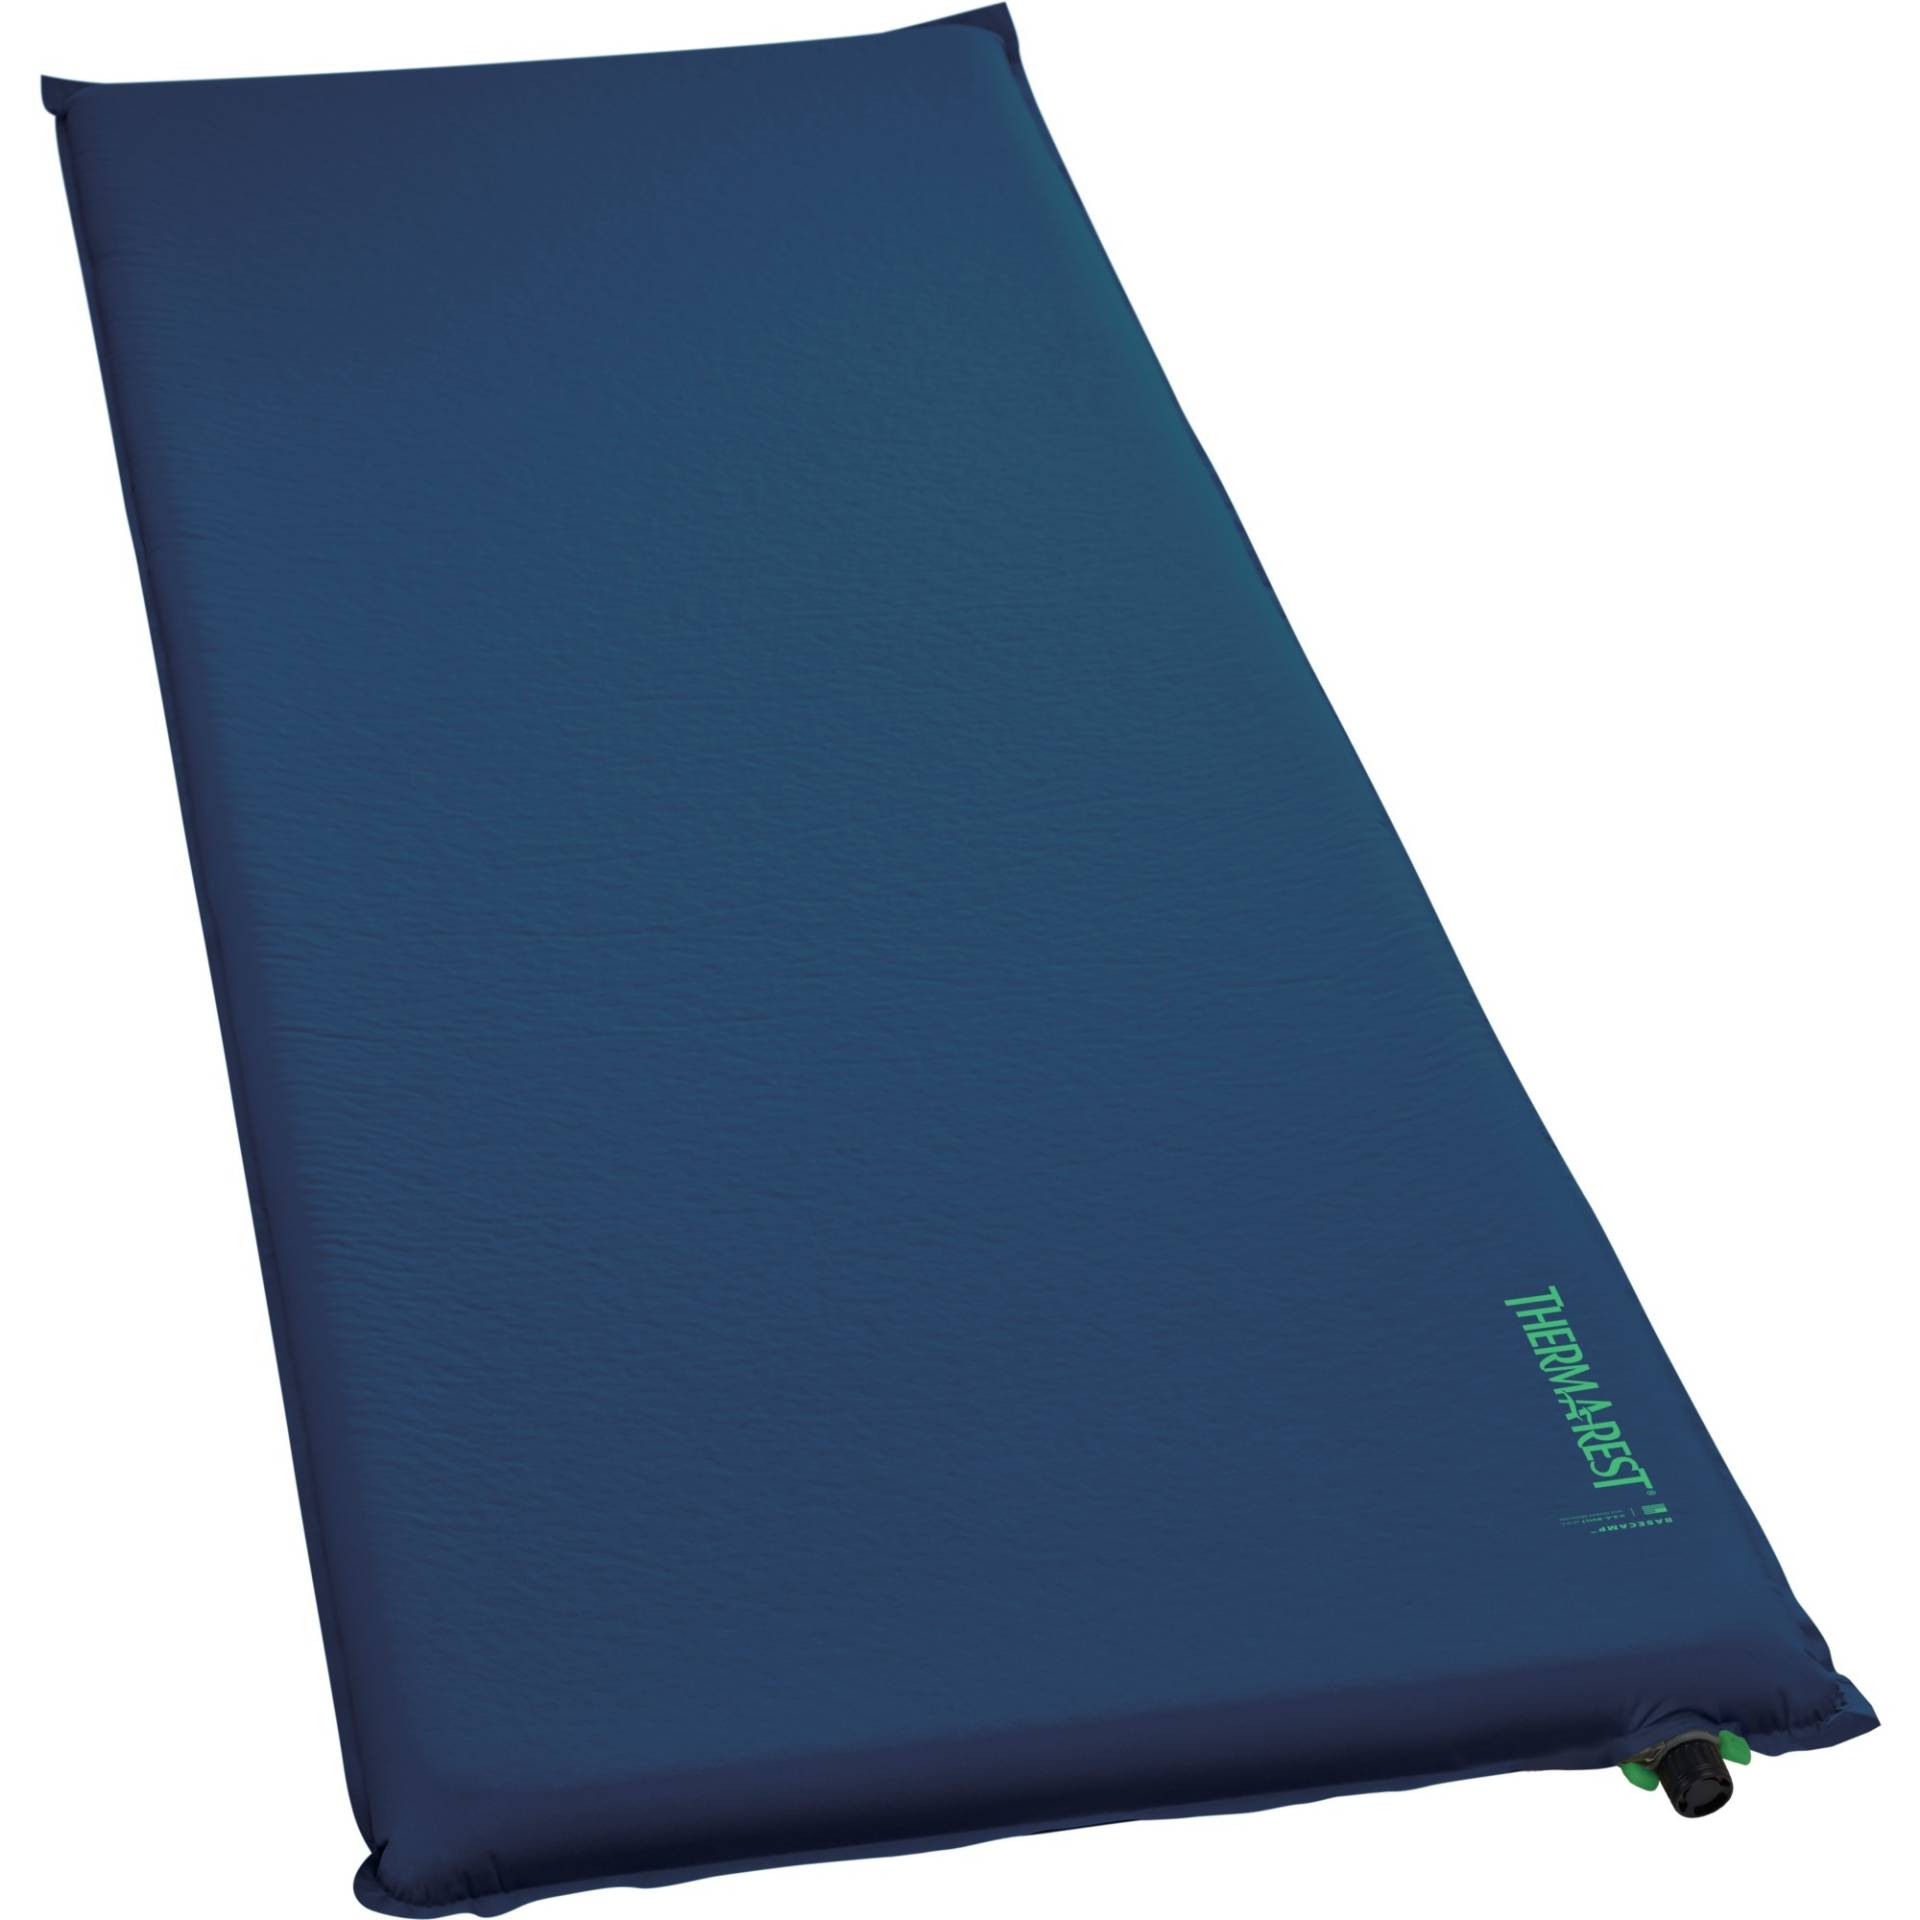 BaseCamp Large 13282, Camping-Matte von Therm-A-Rest